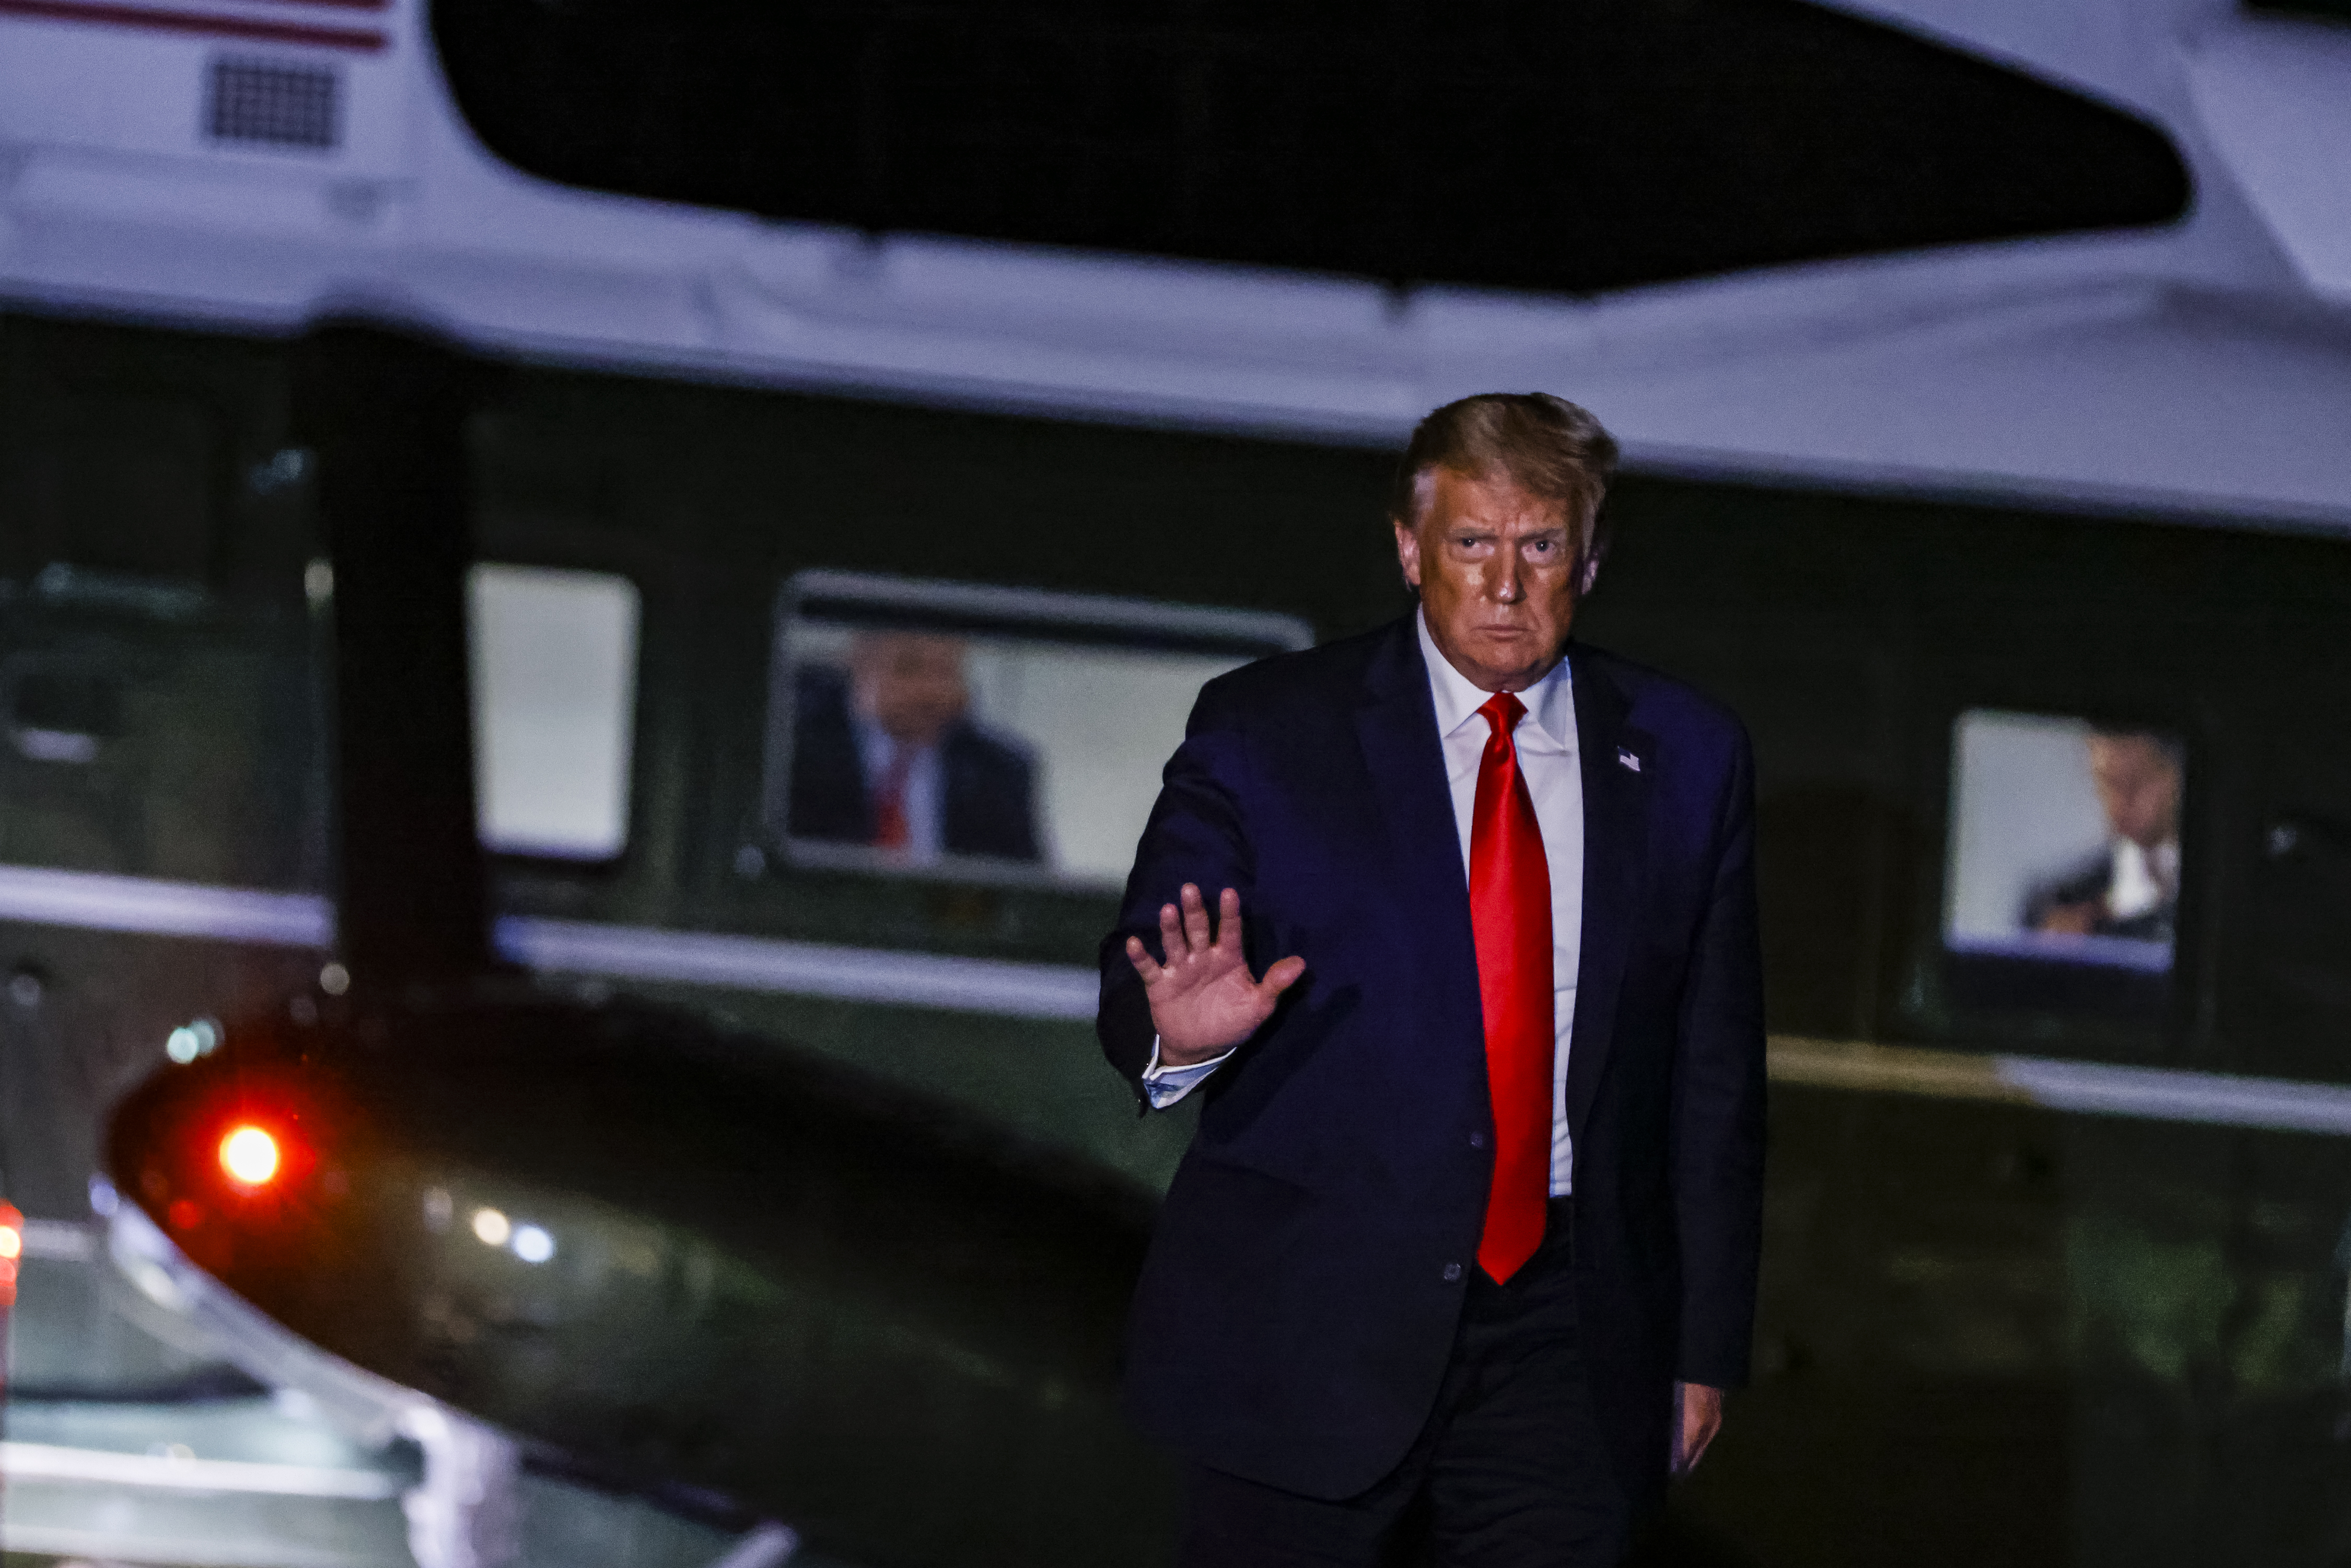 WASHINGTON, DC - AUGUST 09: President Donald Trump arrives at the White House in Marine One on August 9, 2020 in Washington, DC. The President spent the weekend at his property in New Jersey where he attended multiple campaign and fund raising events. (Photo by Samuel Corum/Getty Images)